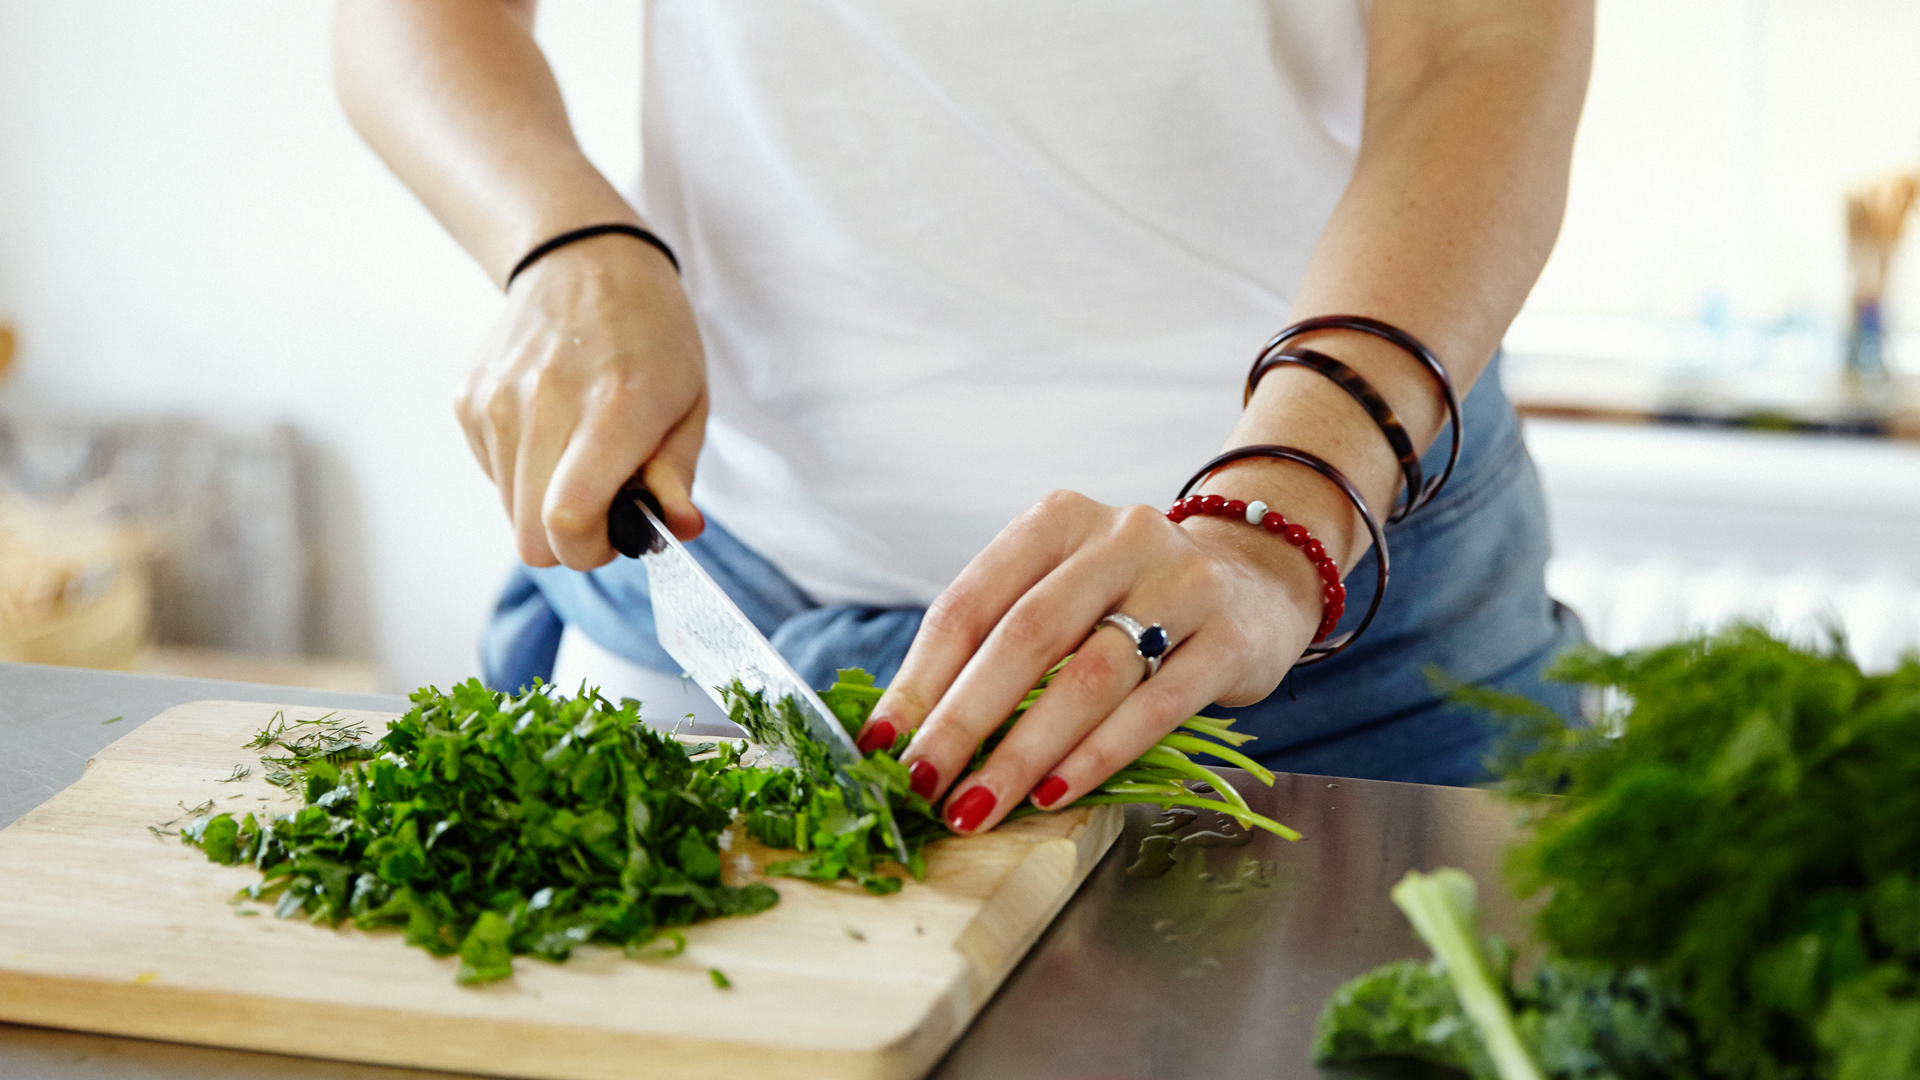 catherine-cuello-chopping-herbs-for-her-recipe-for-french-lentils-with-a-ton-of-herbs-foodadit